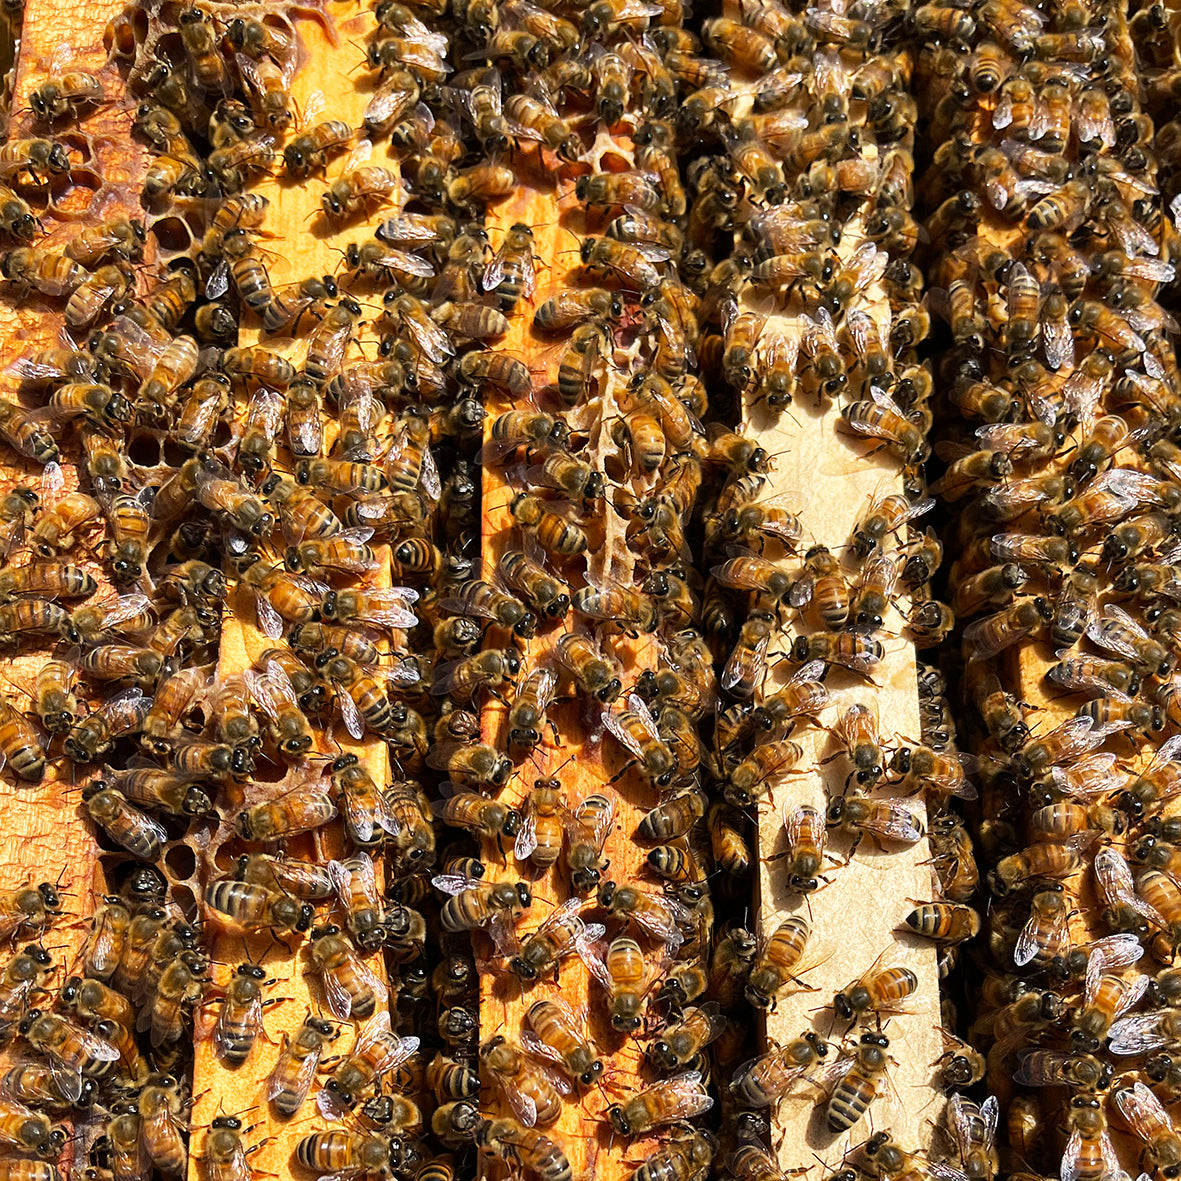 How bees turn pollen to pellets to get it to their hives - Futurity